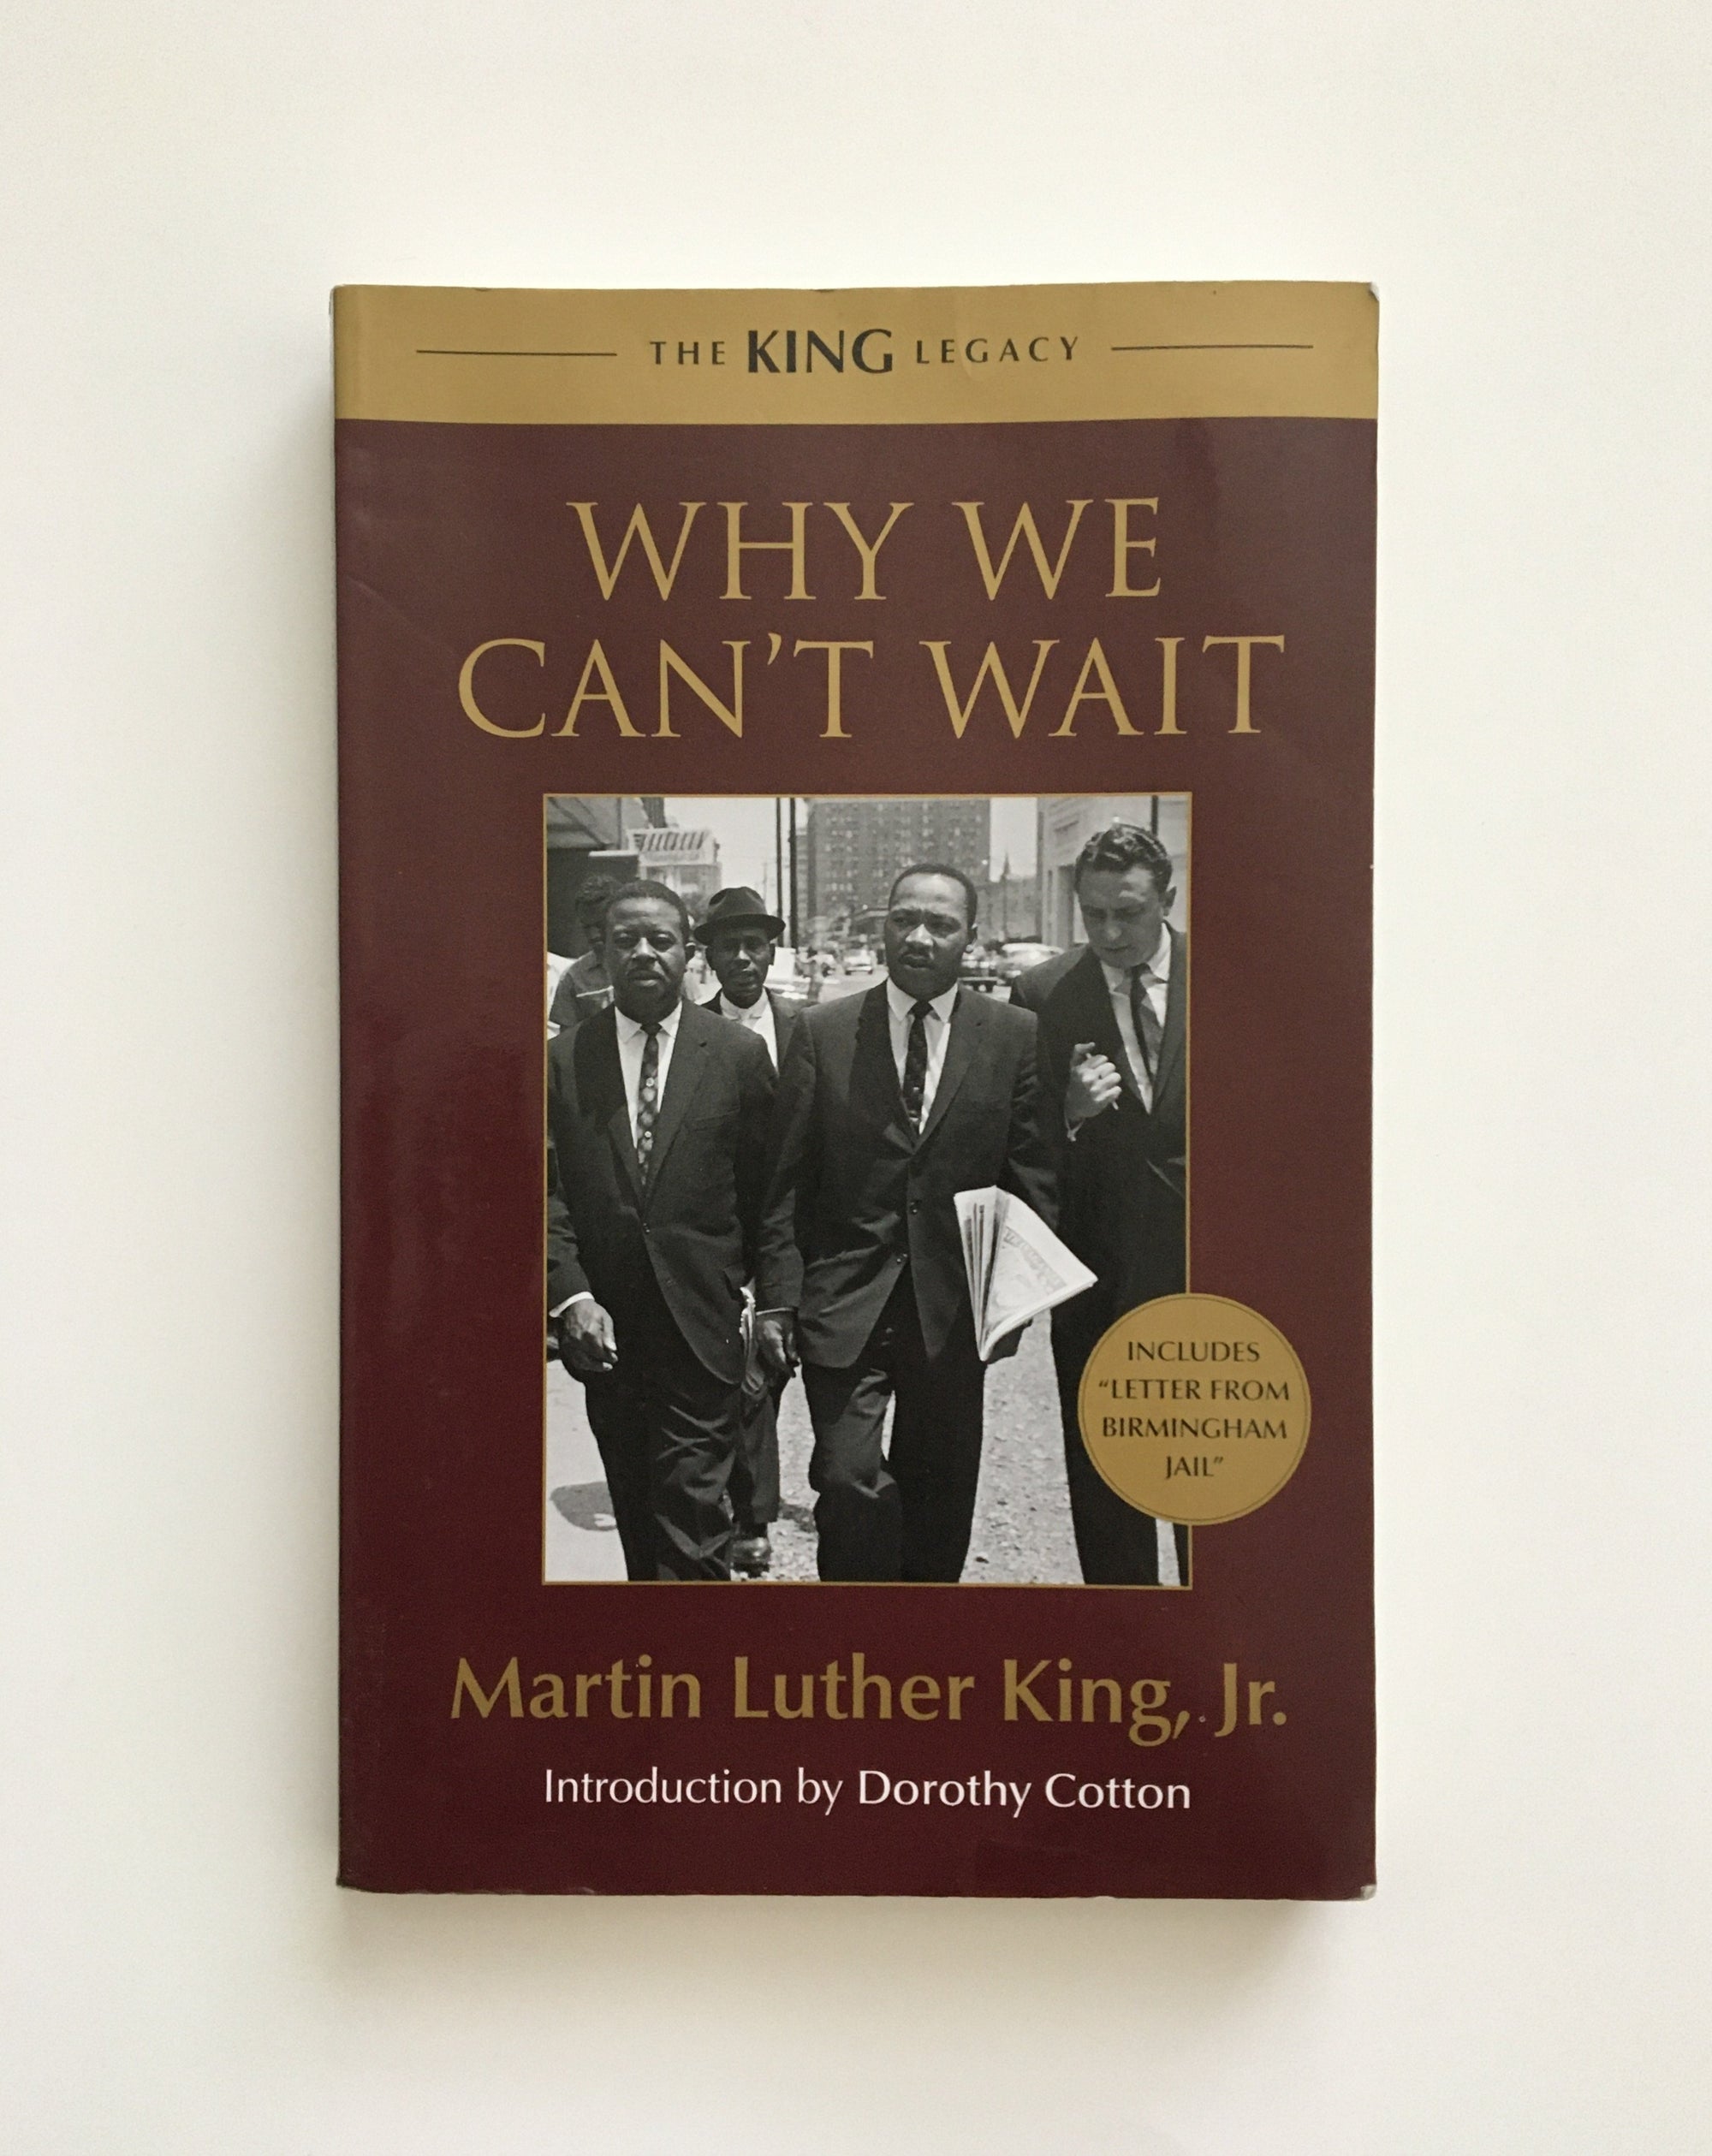 Why We Can't Wait by Martin Luther King Jr., book, Ten Dollar Books, Ten Dollar Books